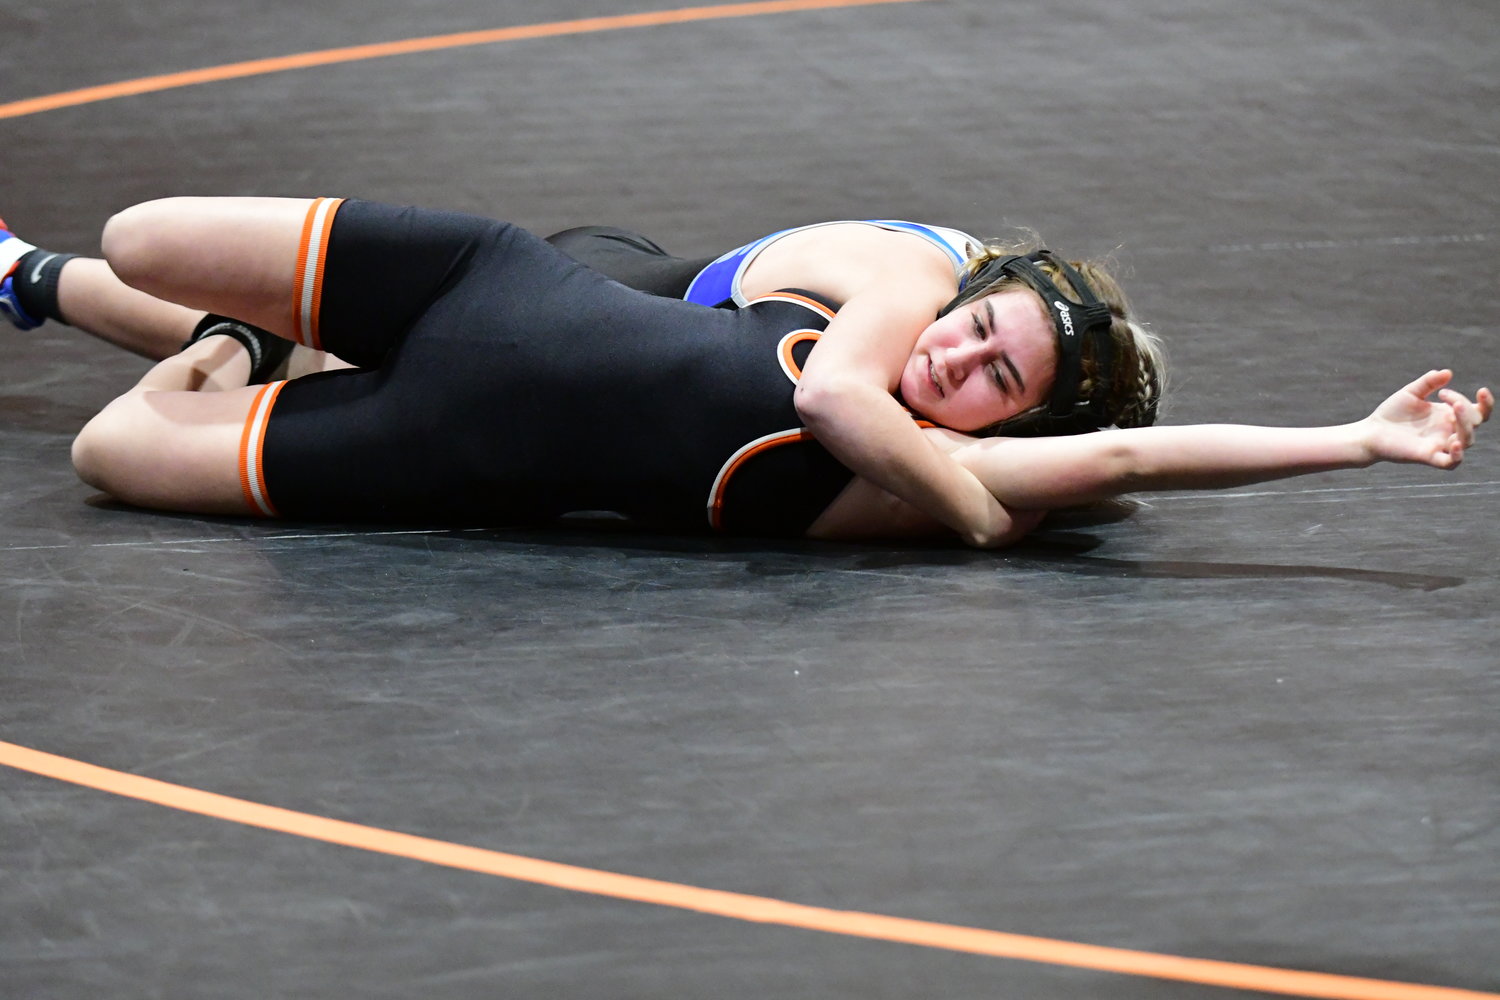 Photos from Kirksville wrestling's home quad on Jan. 25, 2022.